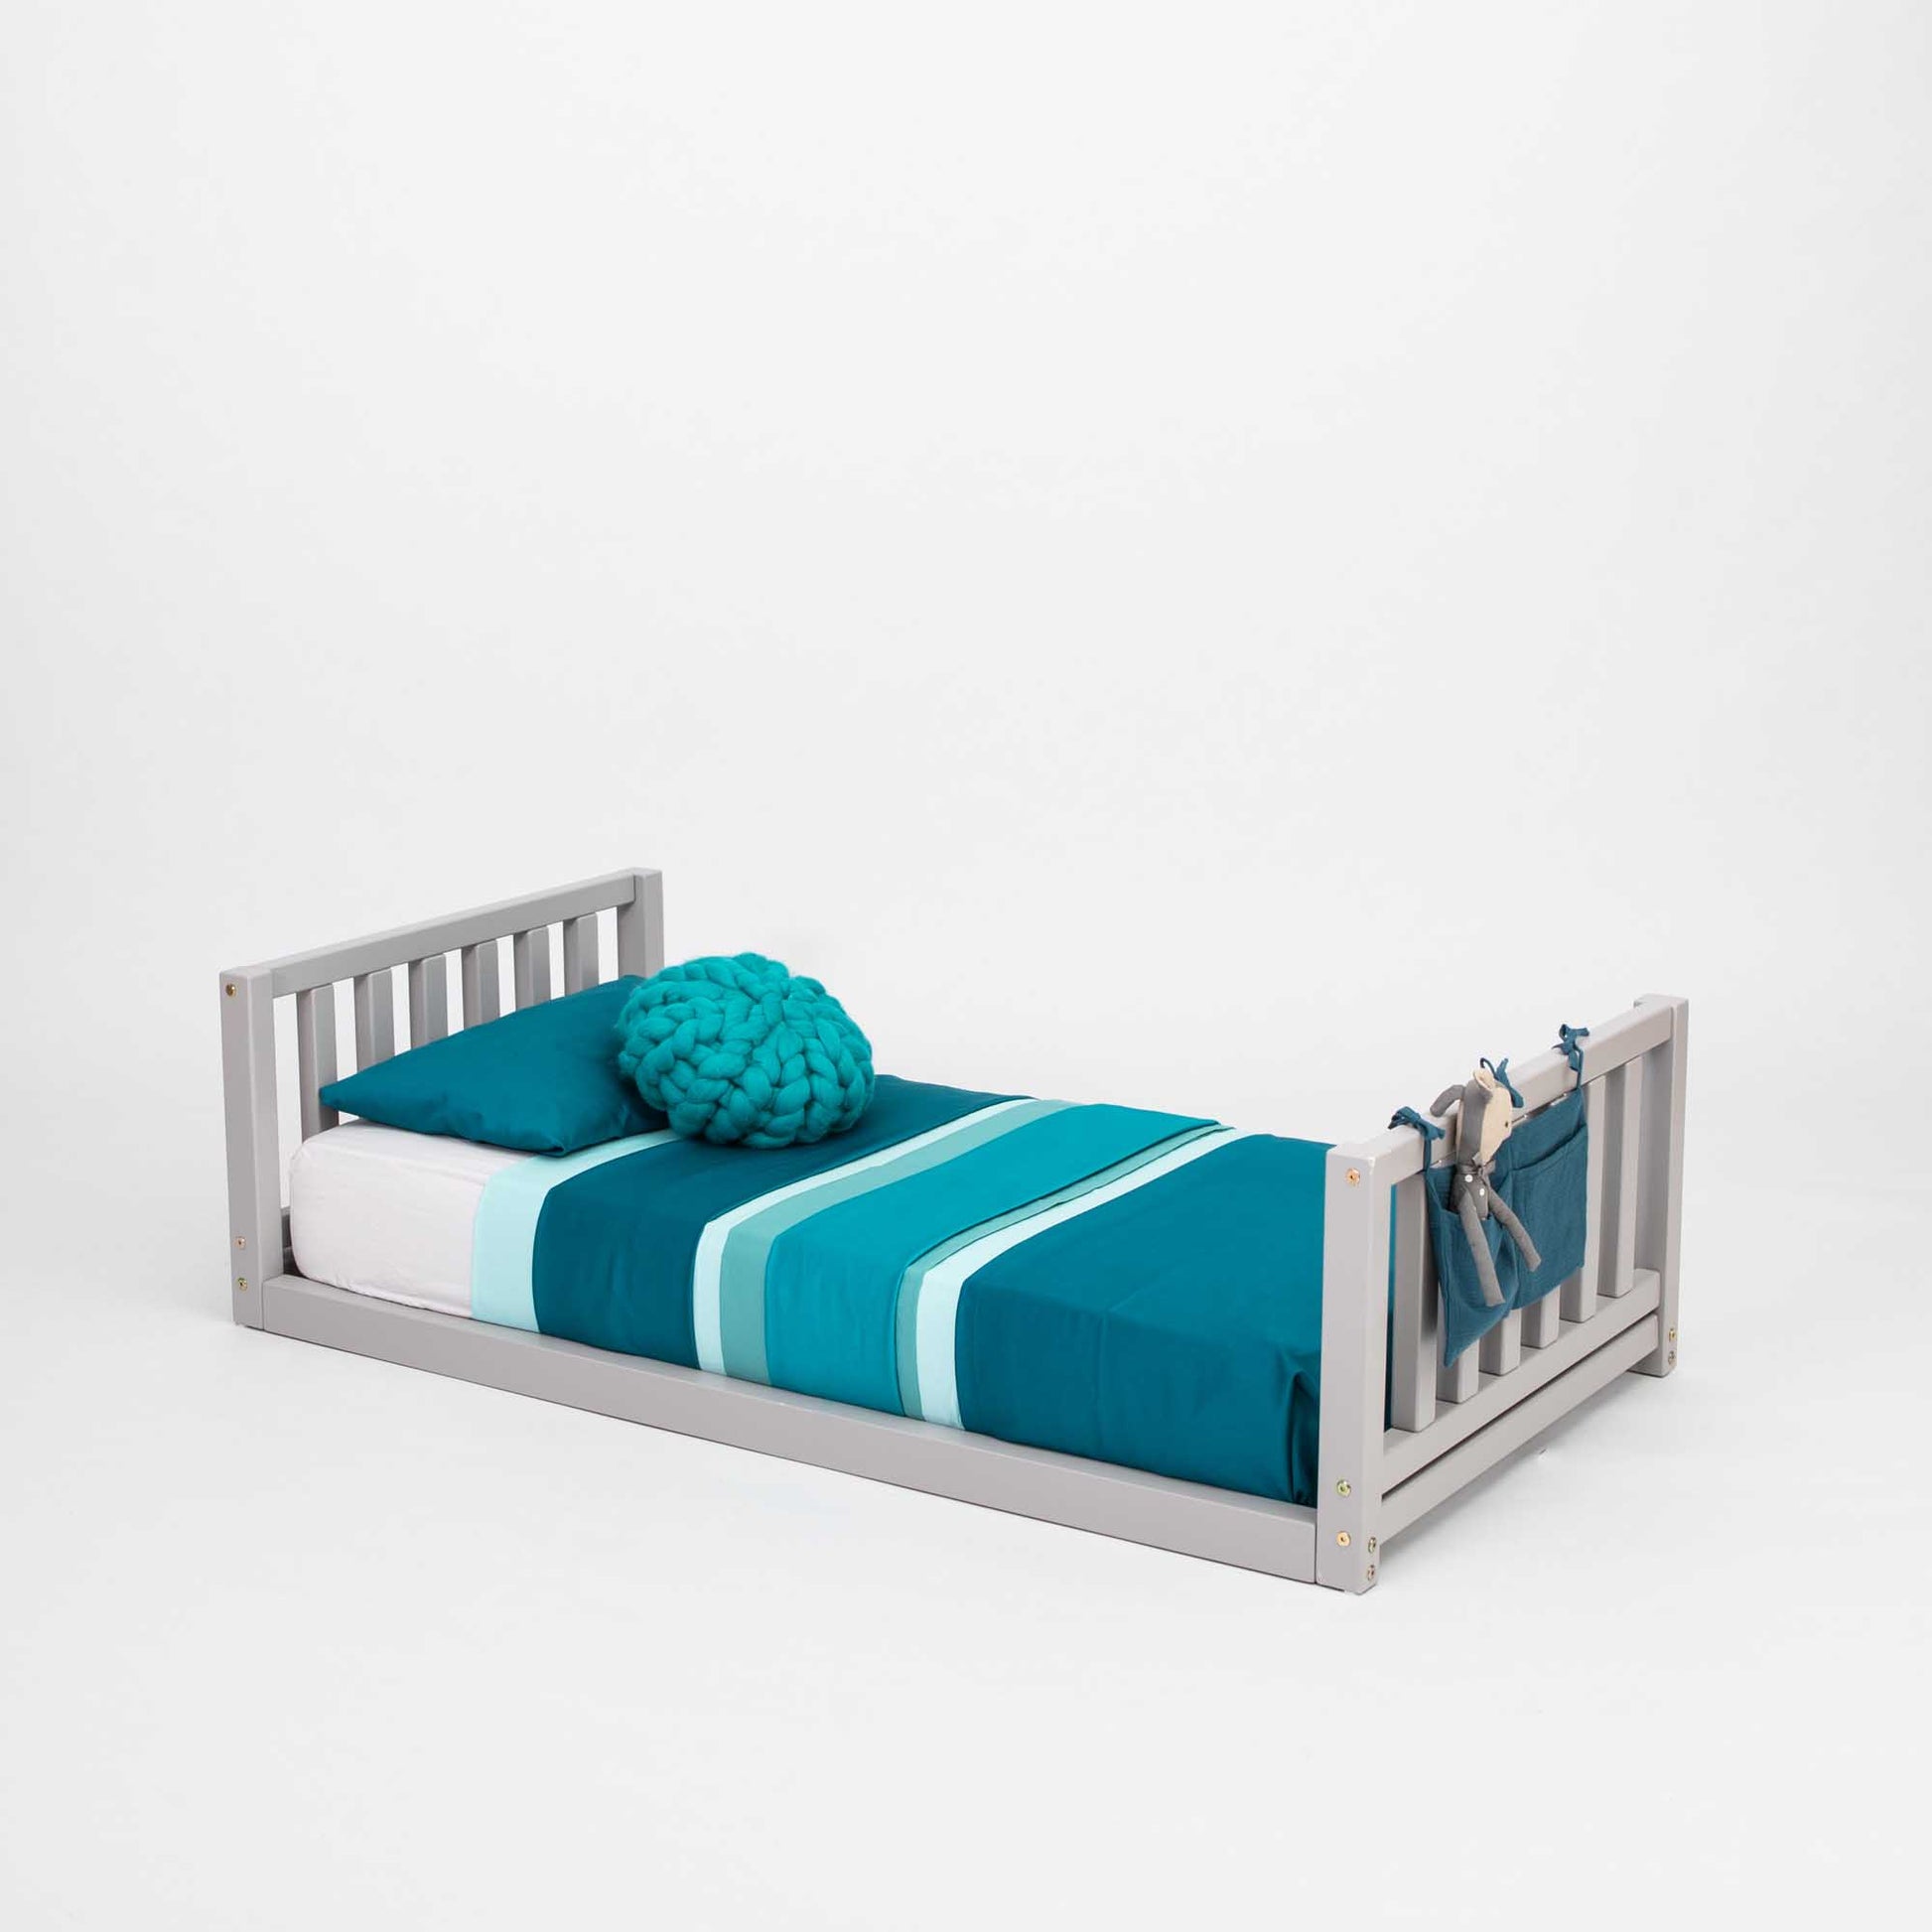 A 2-in-1 kid's bed on legs with a vertical rail headboard and footboard, made of solid pine or birch wood.